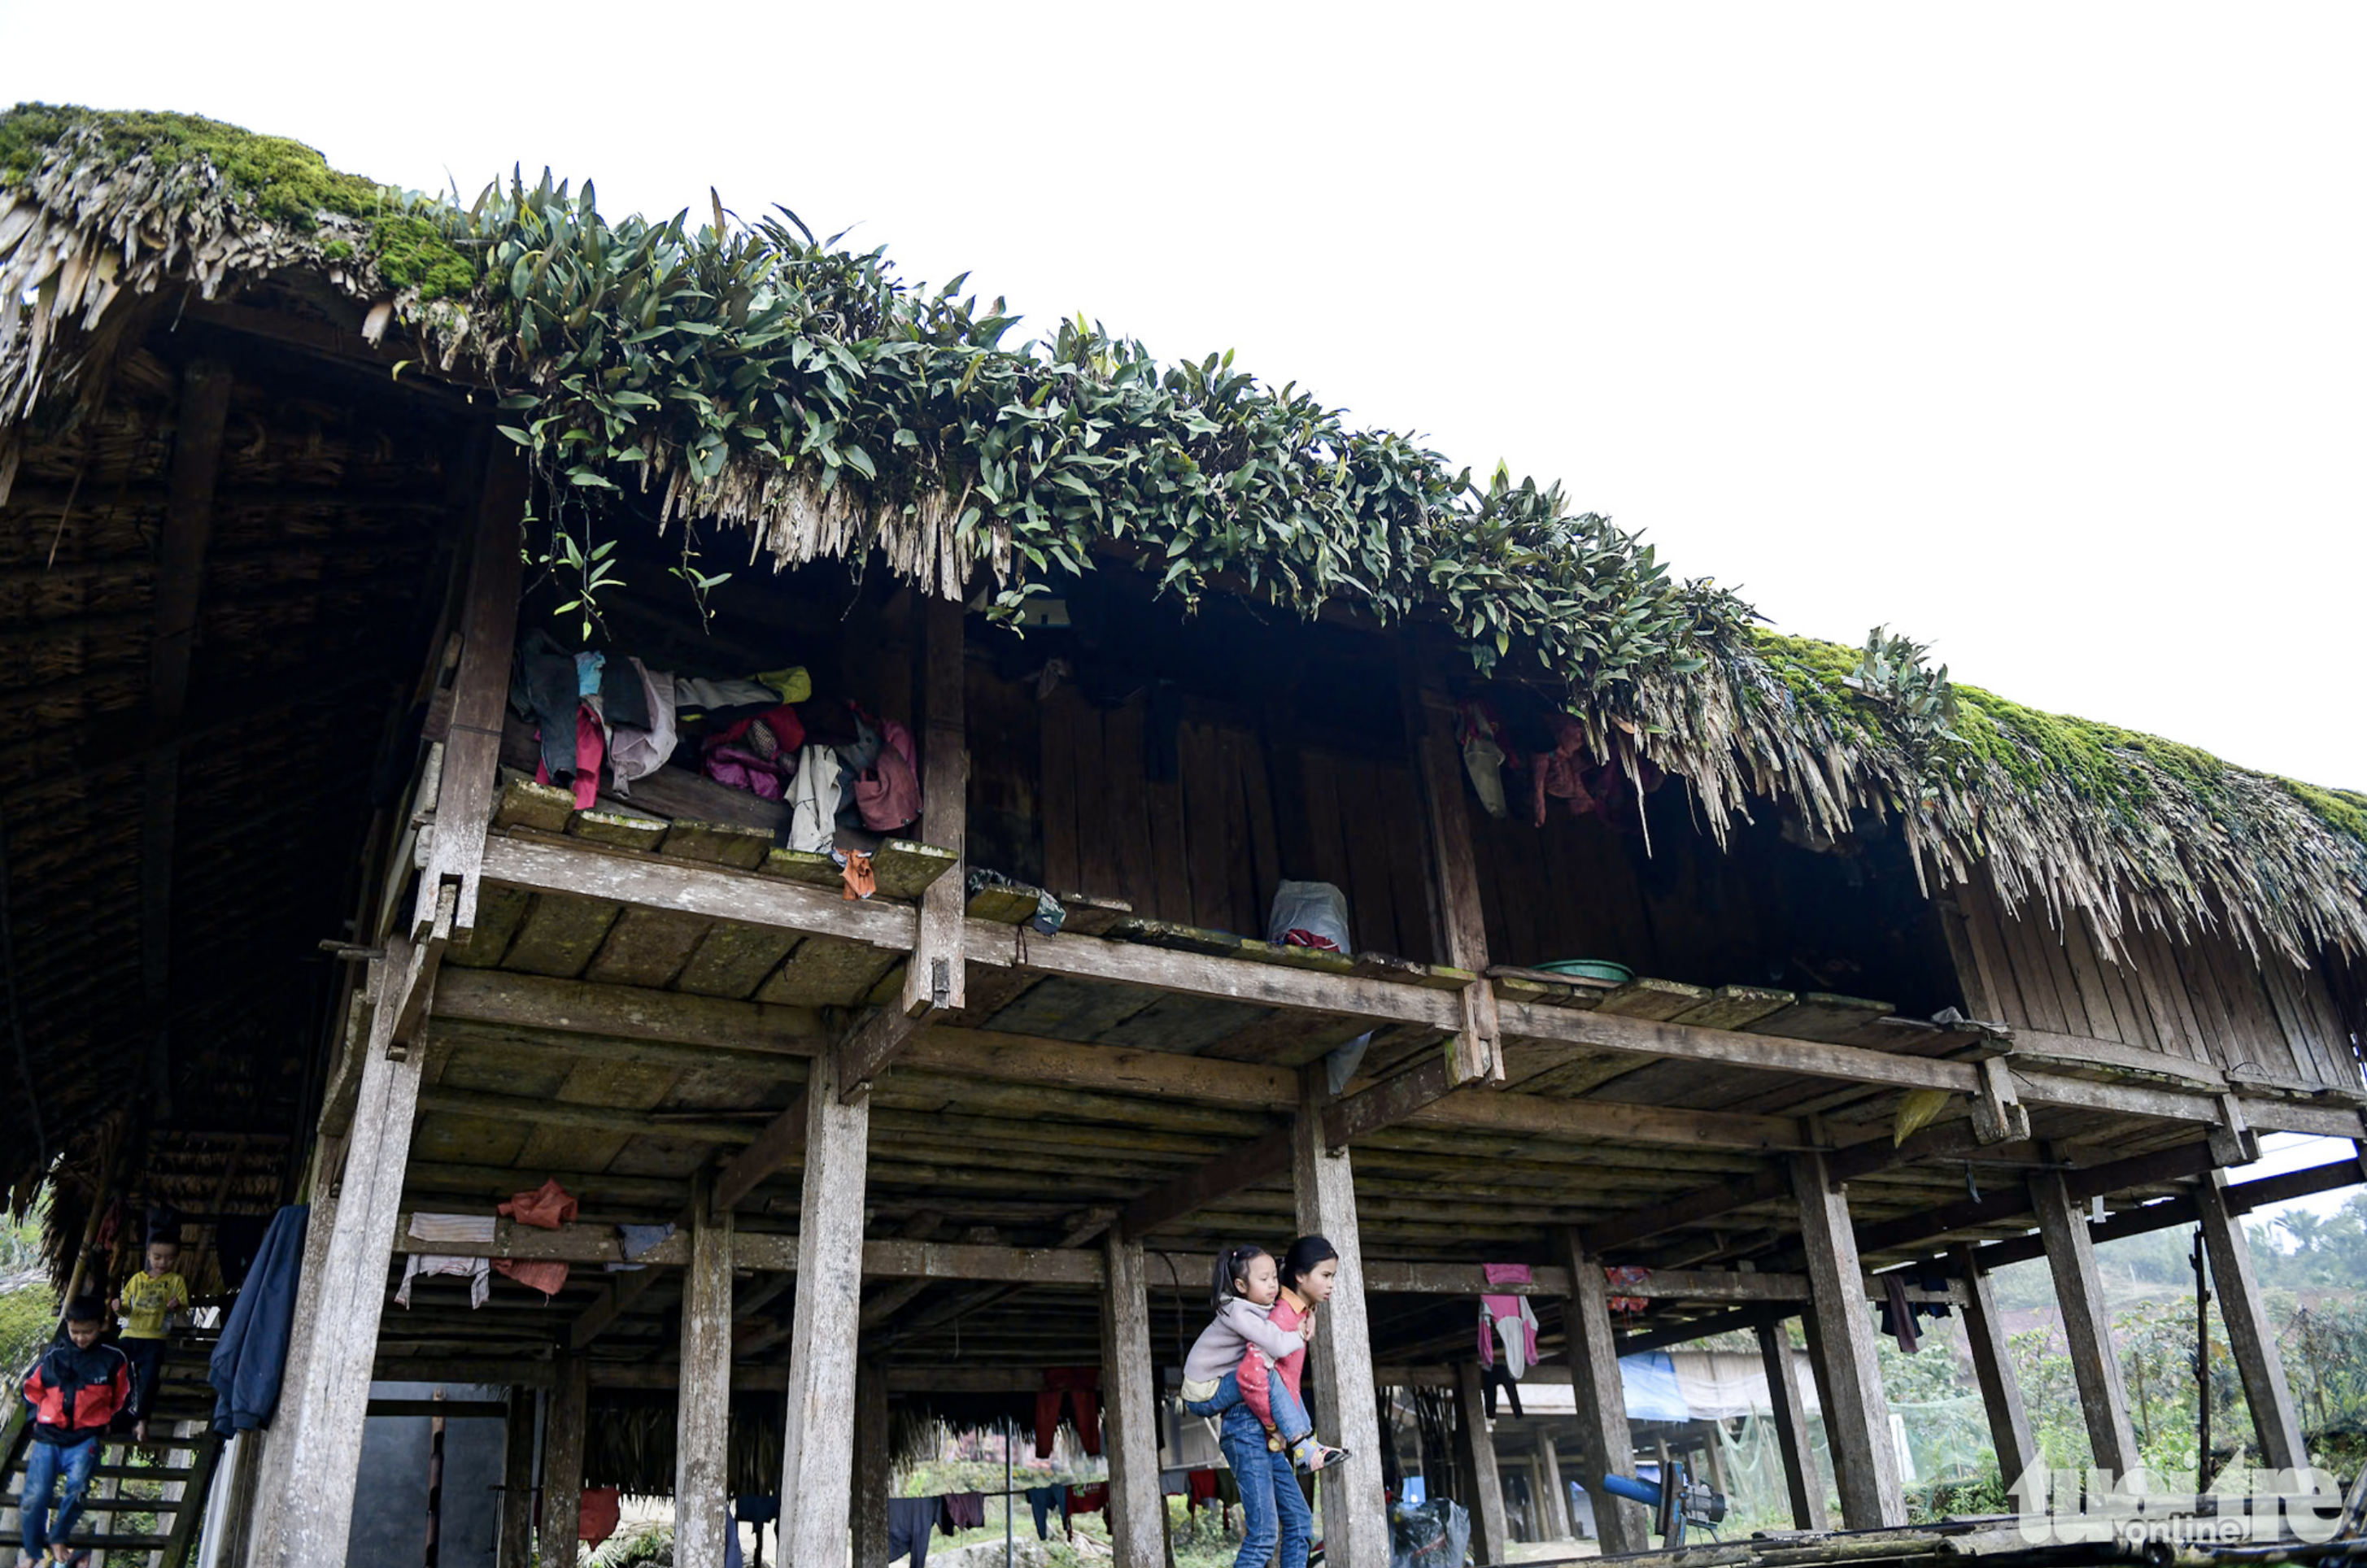 Locals in Xa Phin Mountainous Village in Vi Xuyen District under Ha Giang Province, northern Vietnam wish to maintain roofs made of palm leaves. Photo: Nam Tran / Tuoi Tre